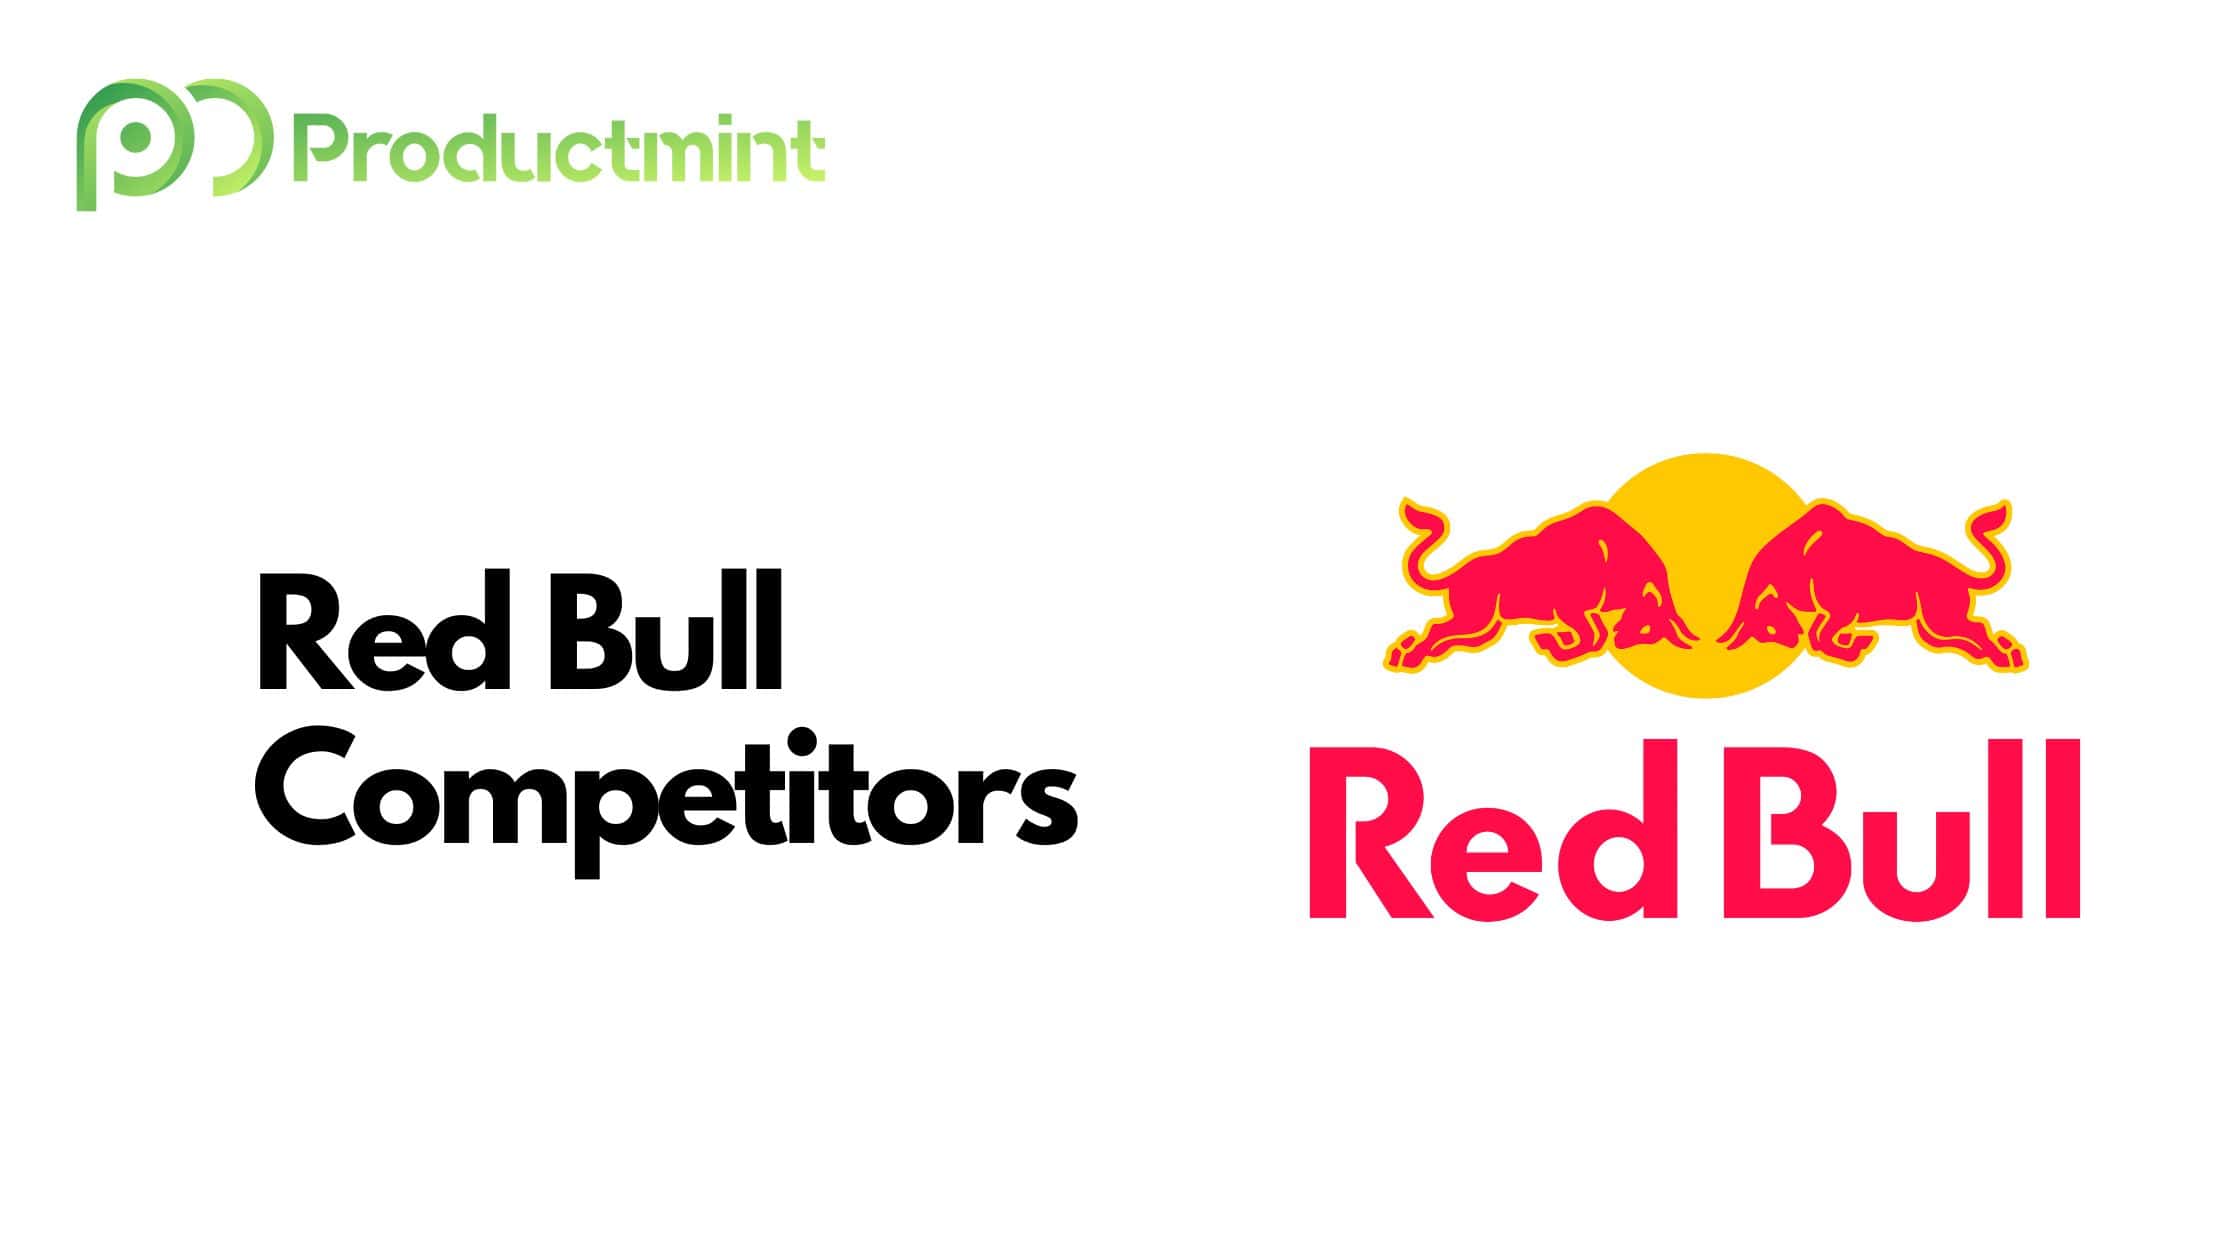 Red Bull Competitors